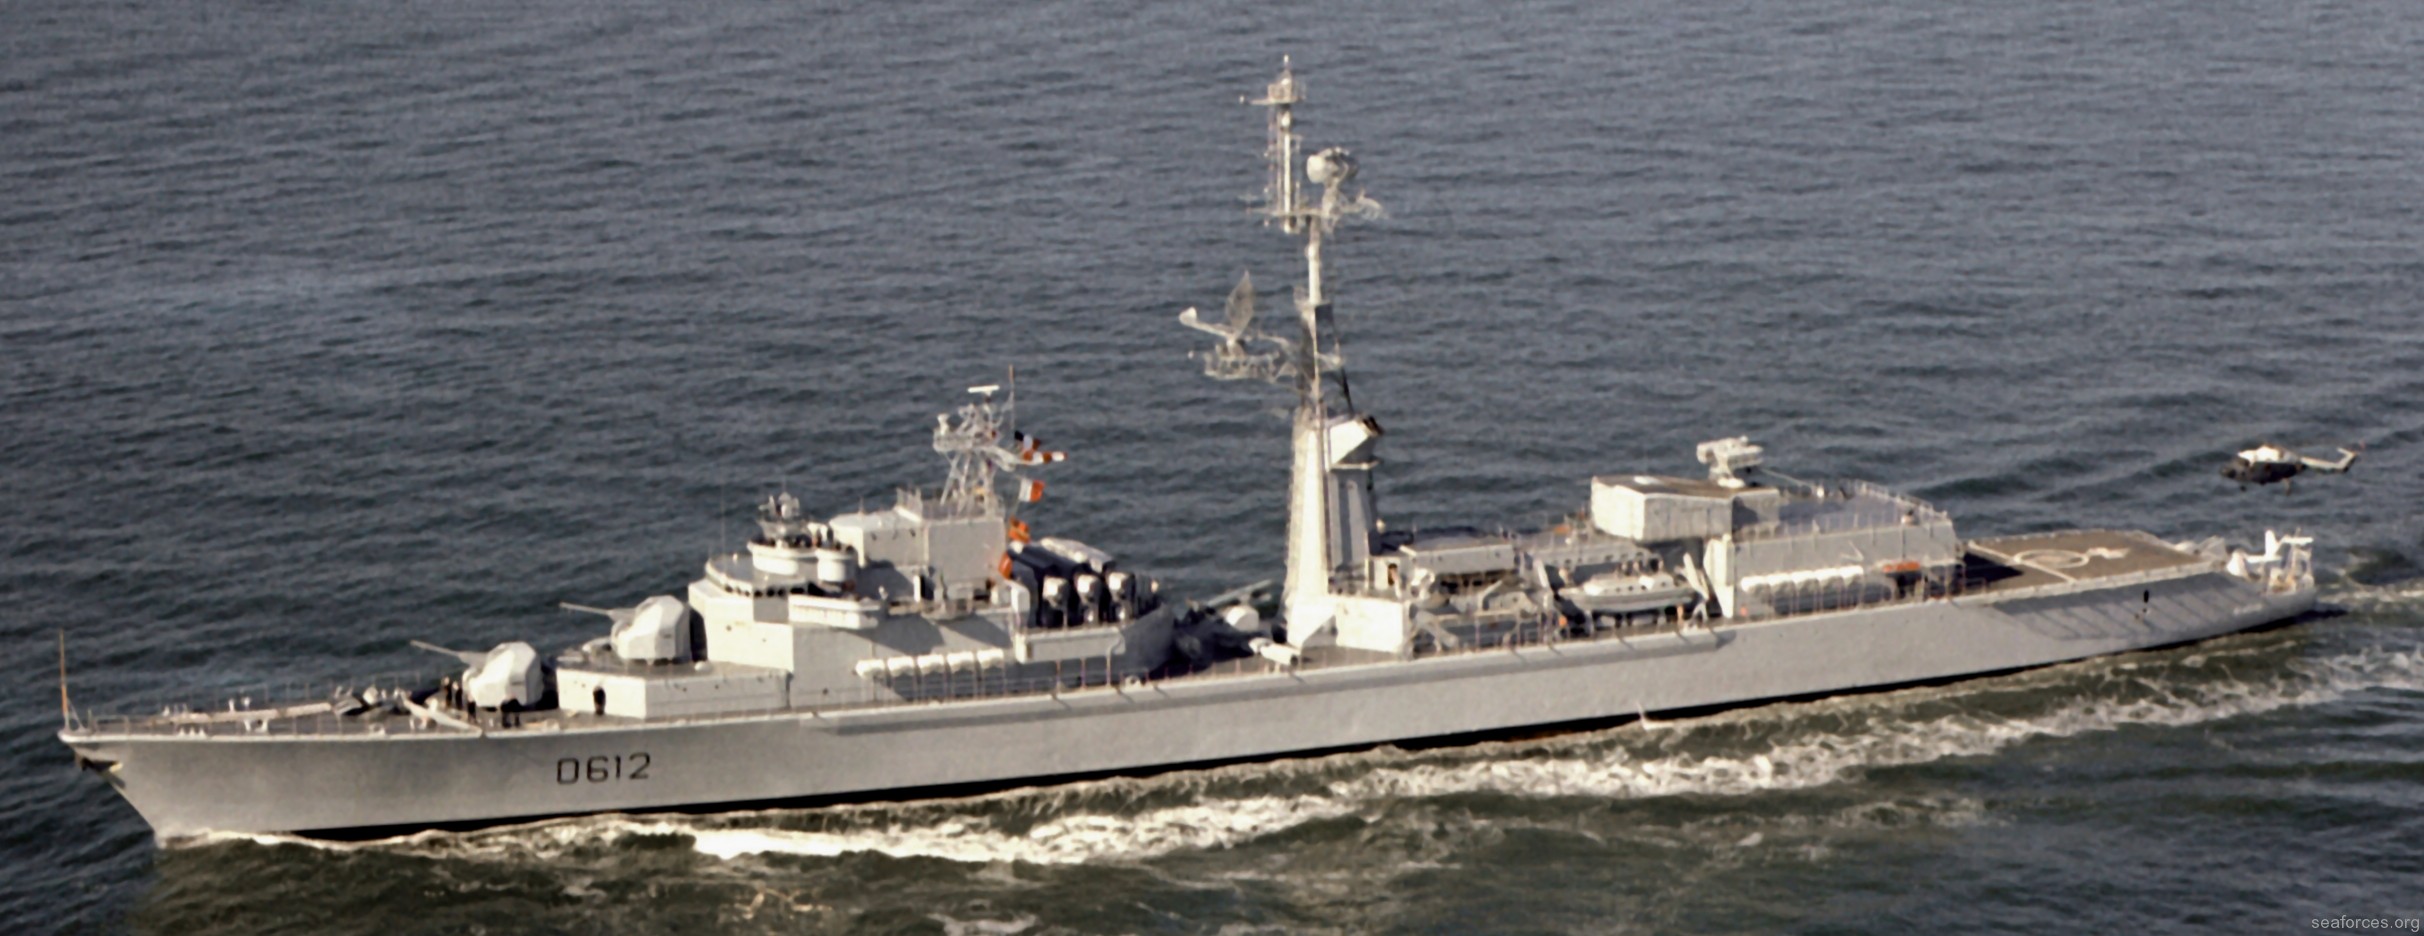 tourville class type f67 asw frigate destroyer french navy marine nationale 06 d-612 de grasse